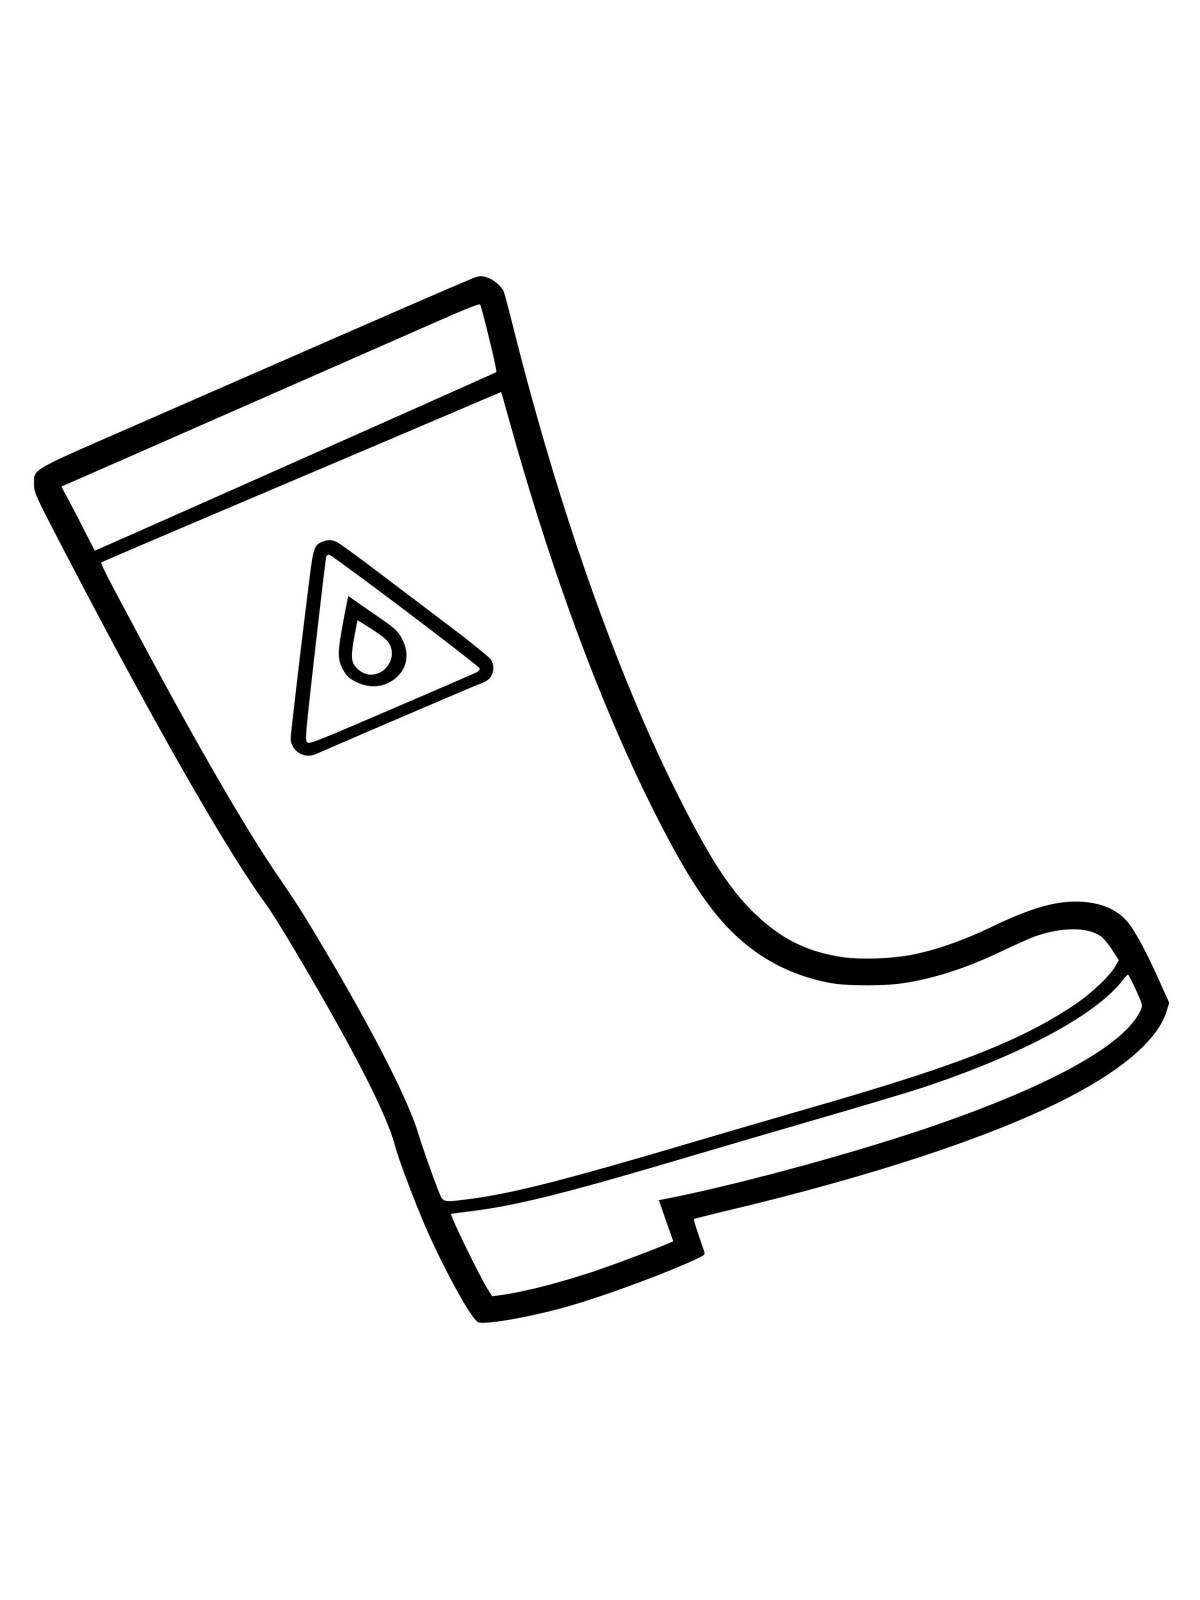 Great boot coloring page